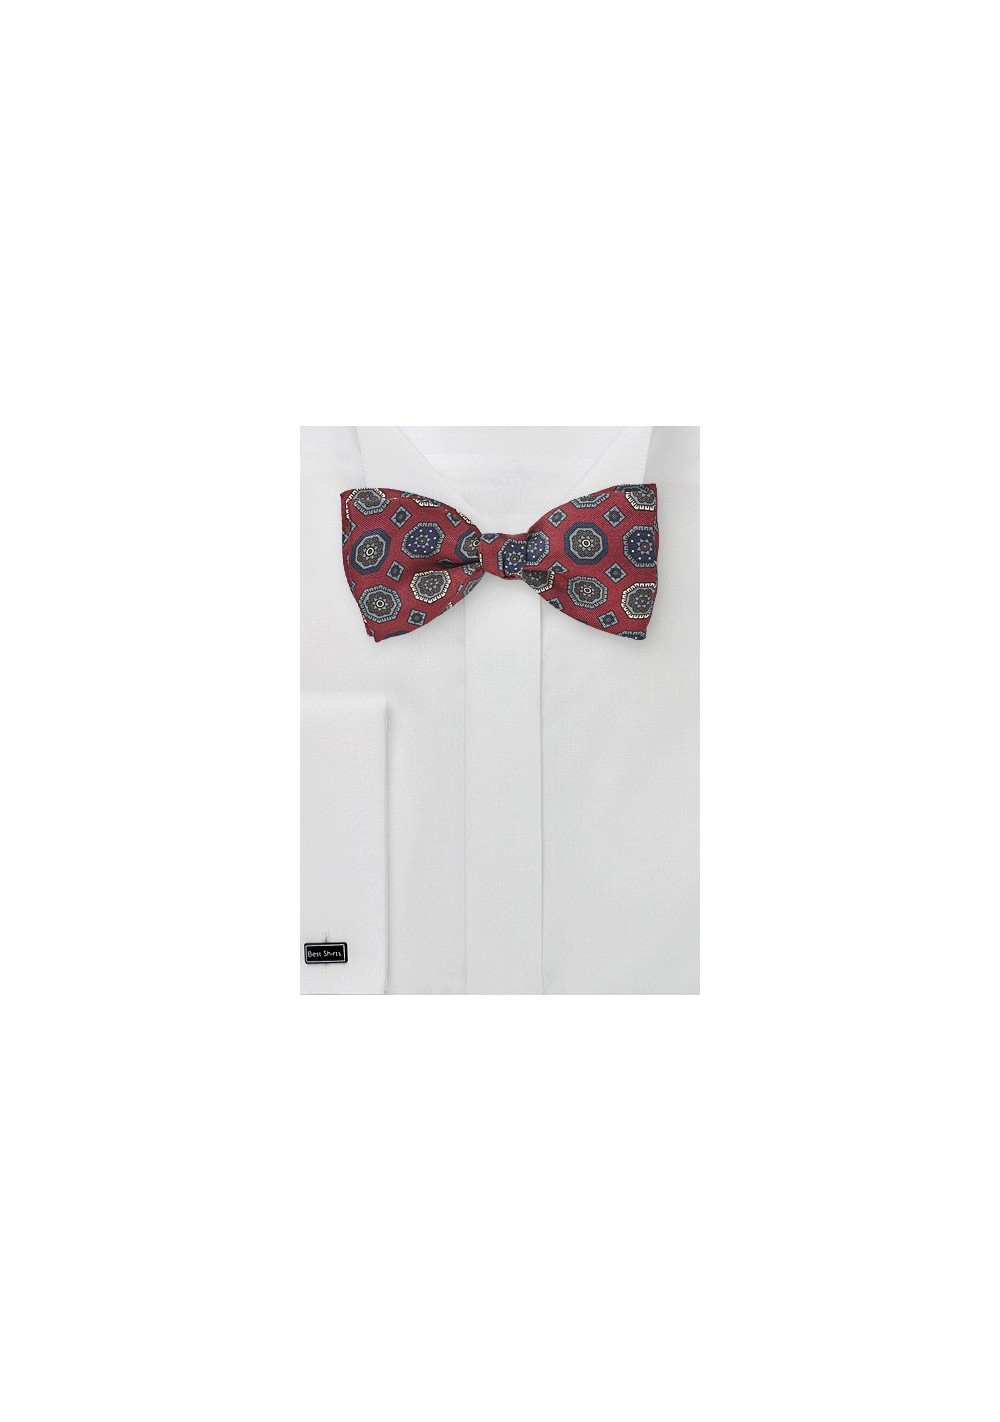 Traditionally Patterned Burgundy Bow Tie